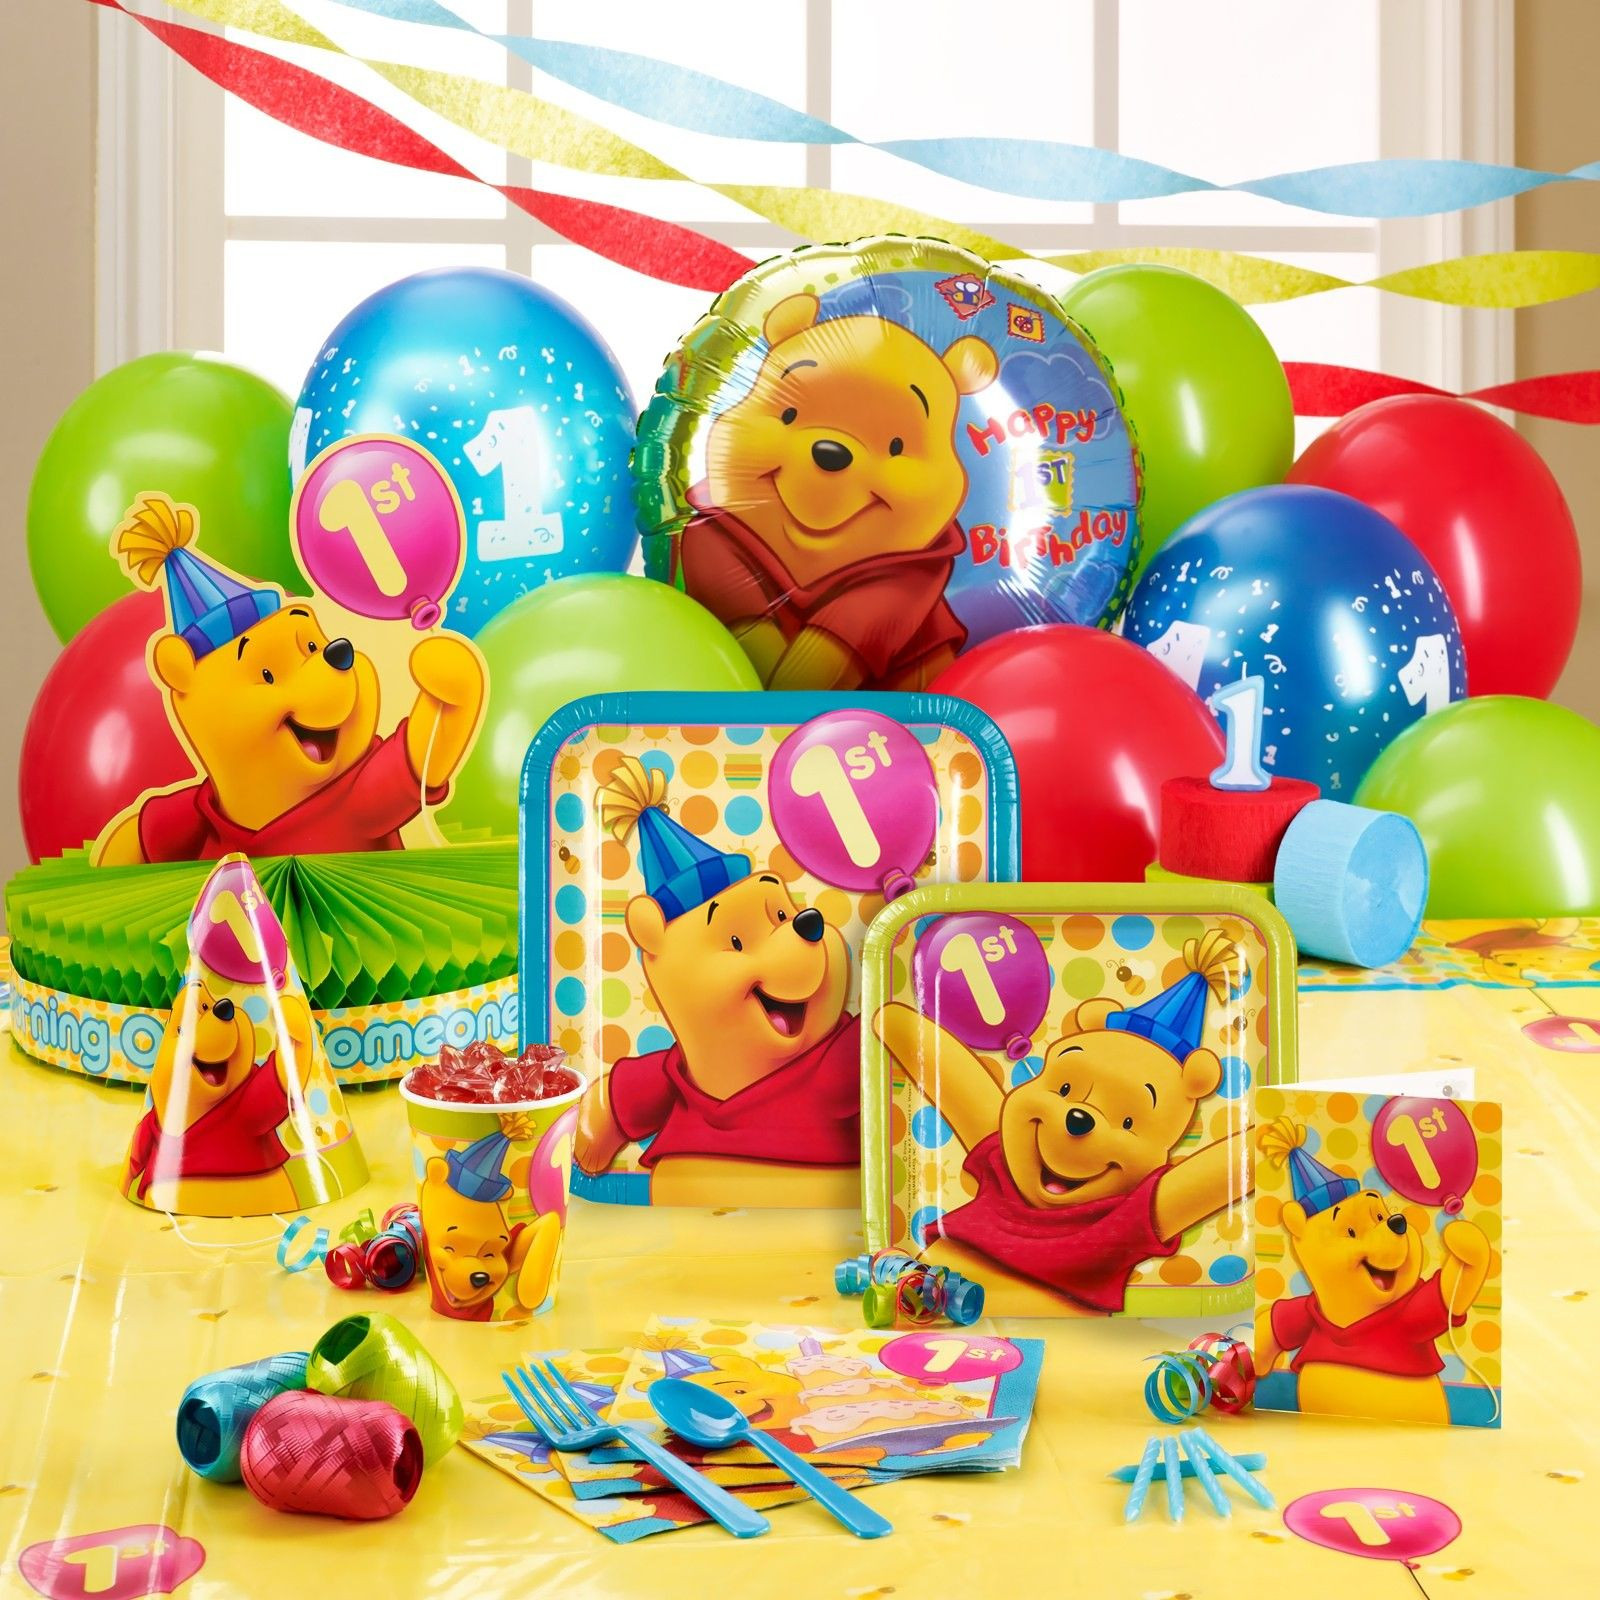 Winnie The Pooh Baby Shower Decorations Party City
 Decor Beautiful Winnie The Pooh Party Supplies